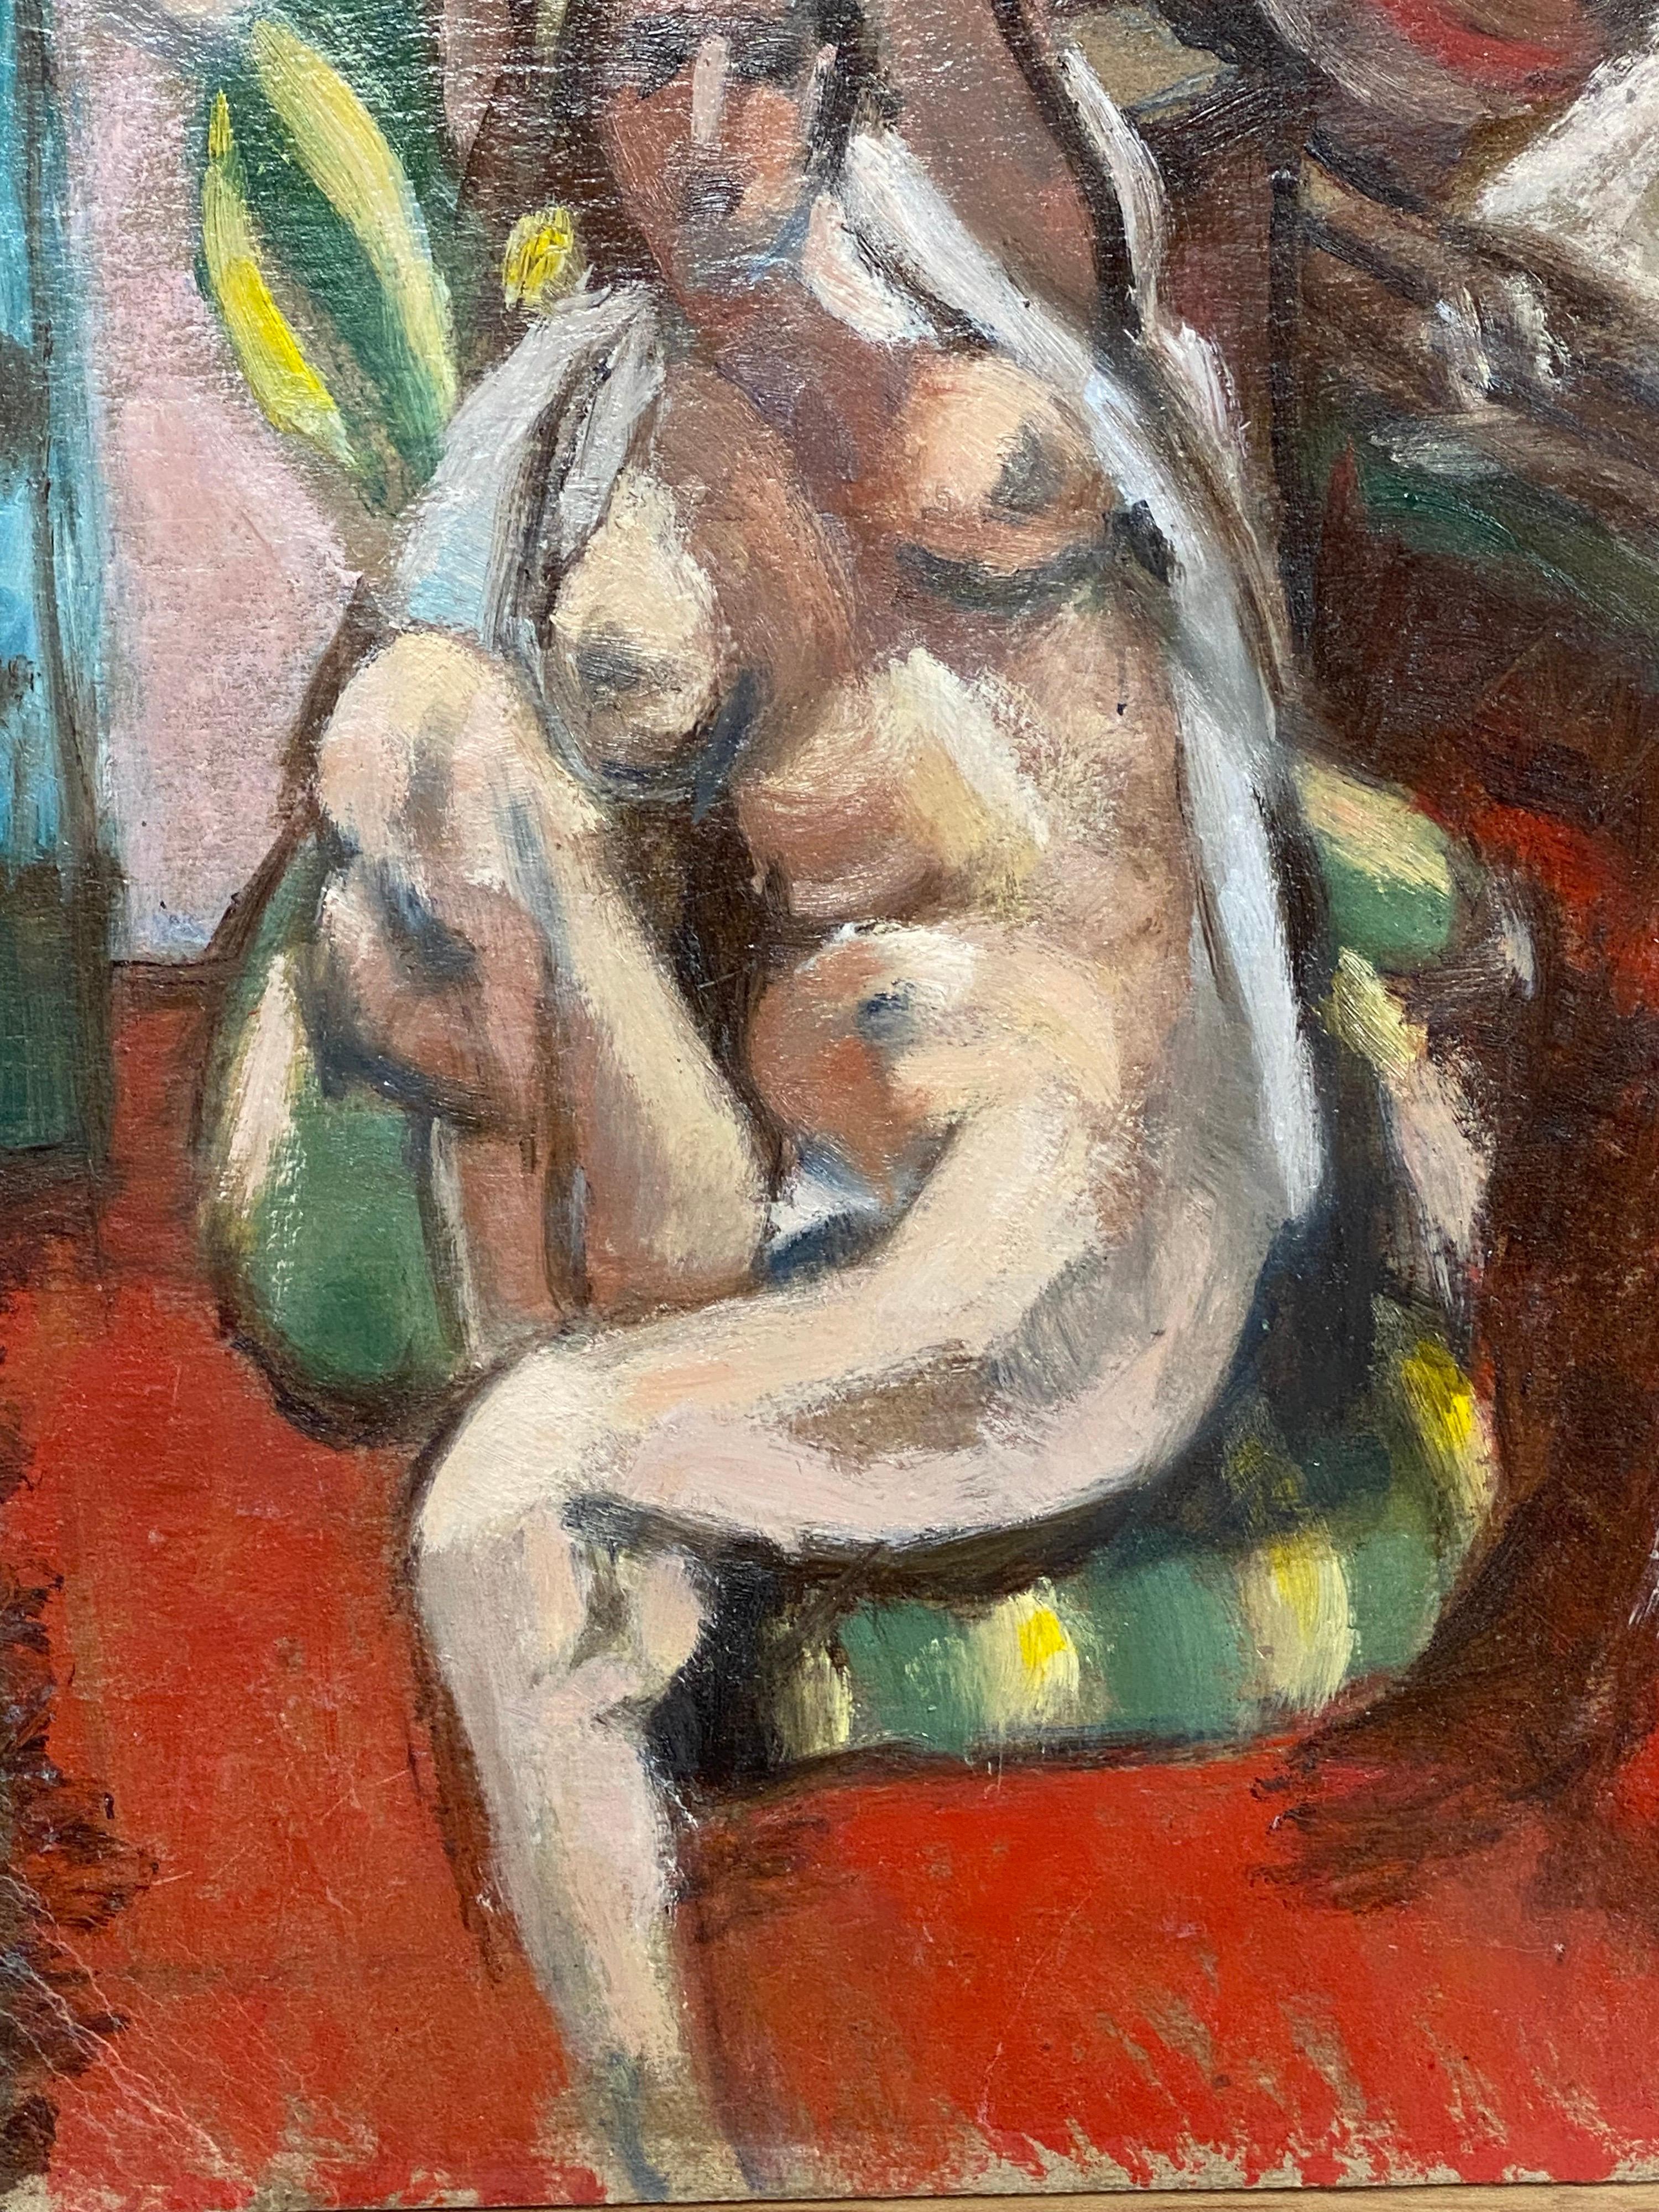 Artist/ School: French School, mid 20th century

Title: Nude Figure in Interior

Medium: oil painting on board, unframed .

Size: : 13.5 x 10.5 inches

Provenance: private collection, France

Condition: The painting is in overall very good and